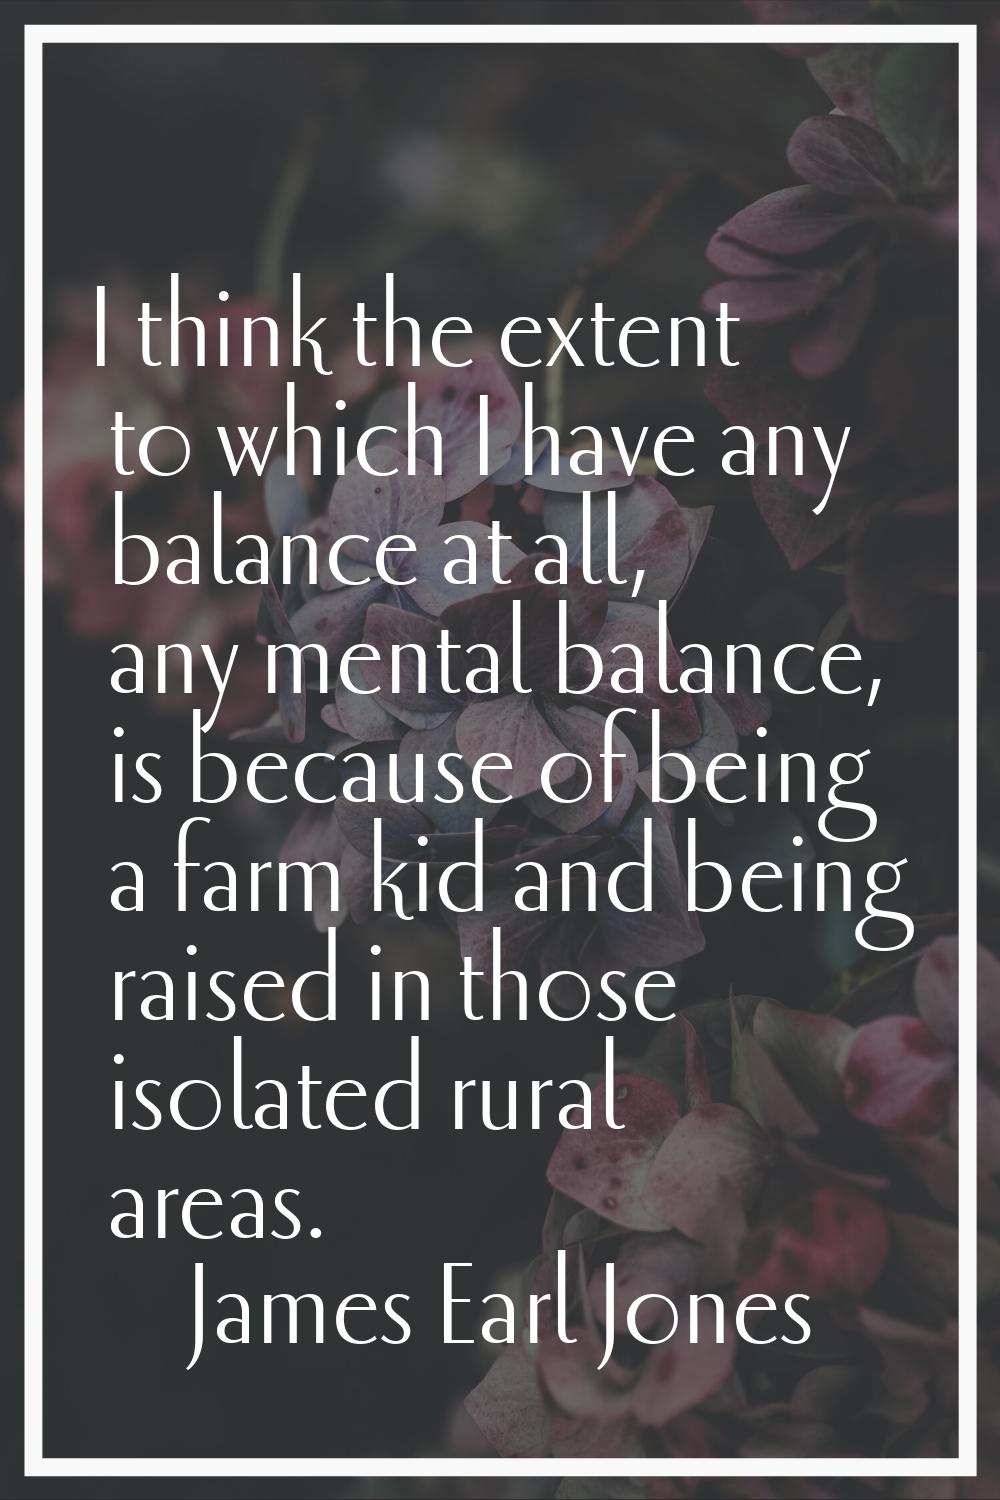 I think the extent to which I have any balance at all, any mental balance, is because of being a fa